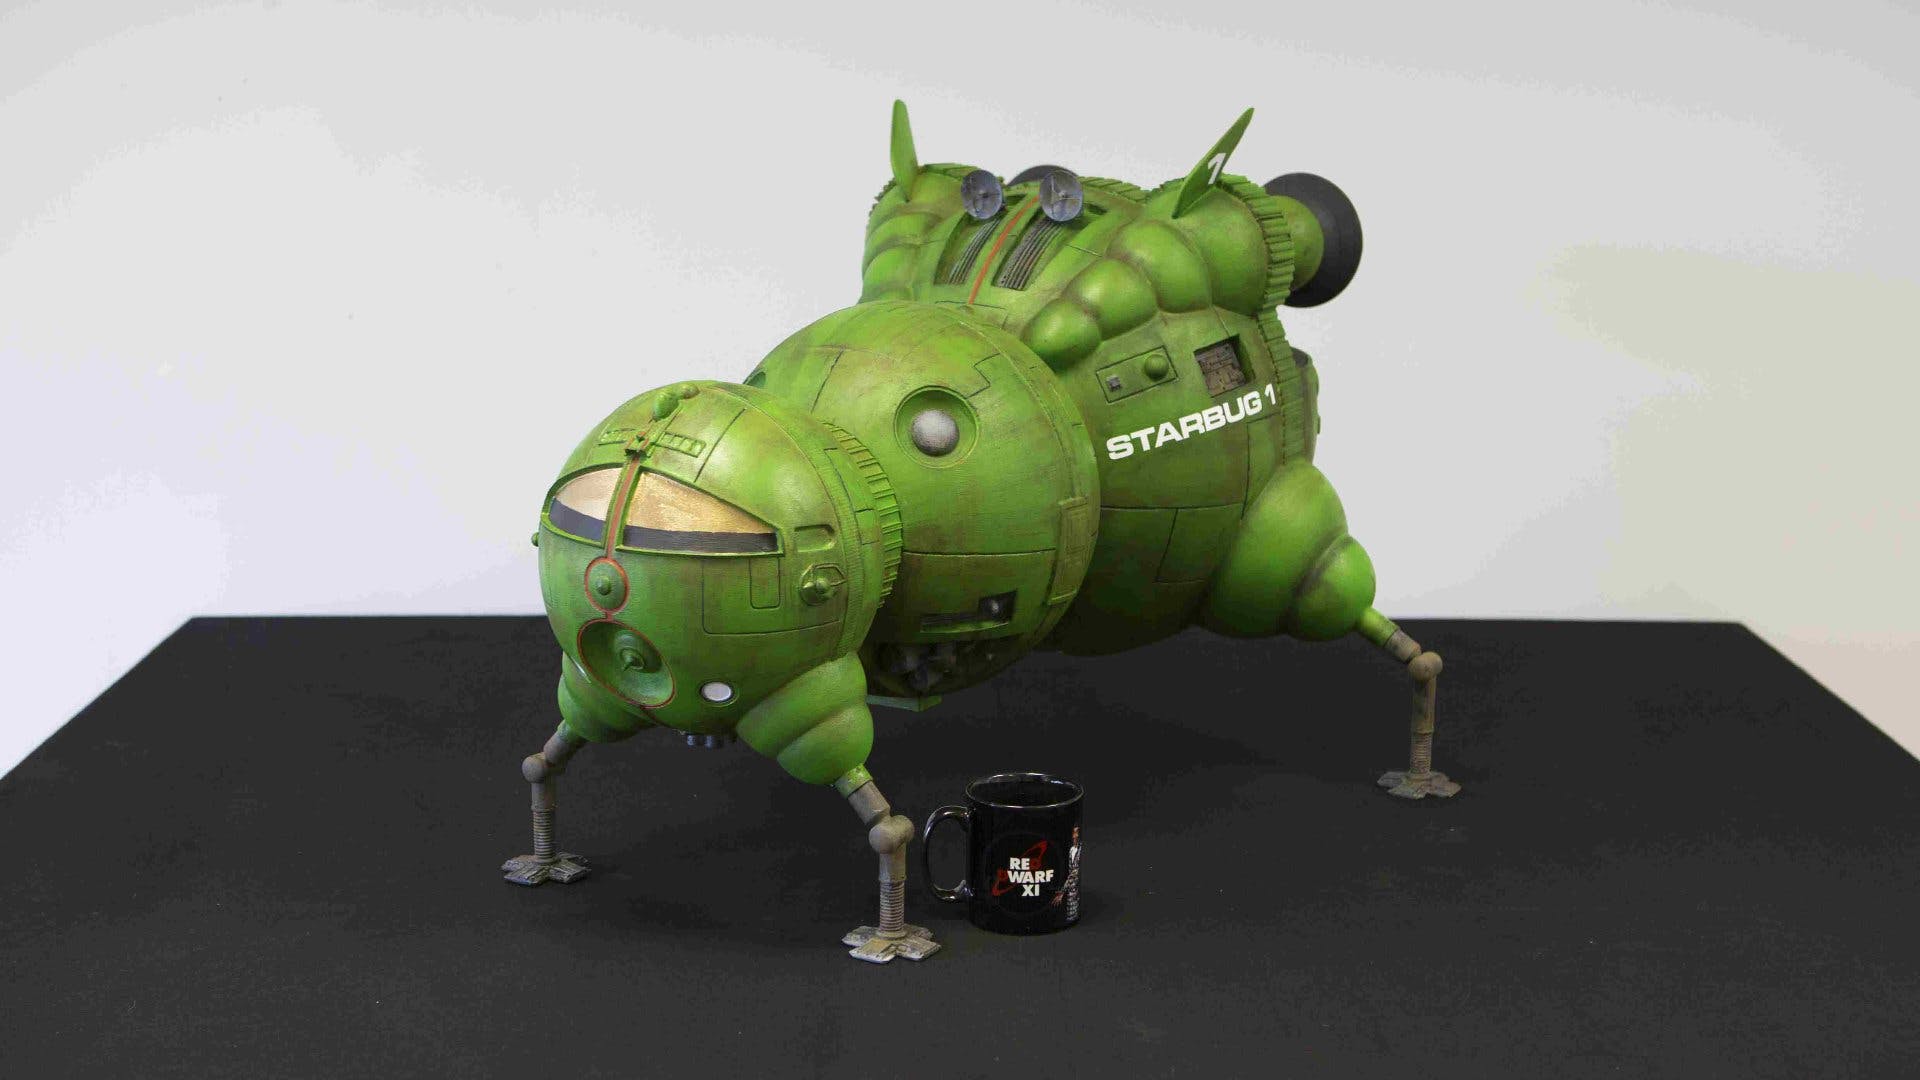 Red Dwarf Starbug model auctioned for Comic Relief | SciFiNow - The